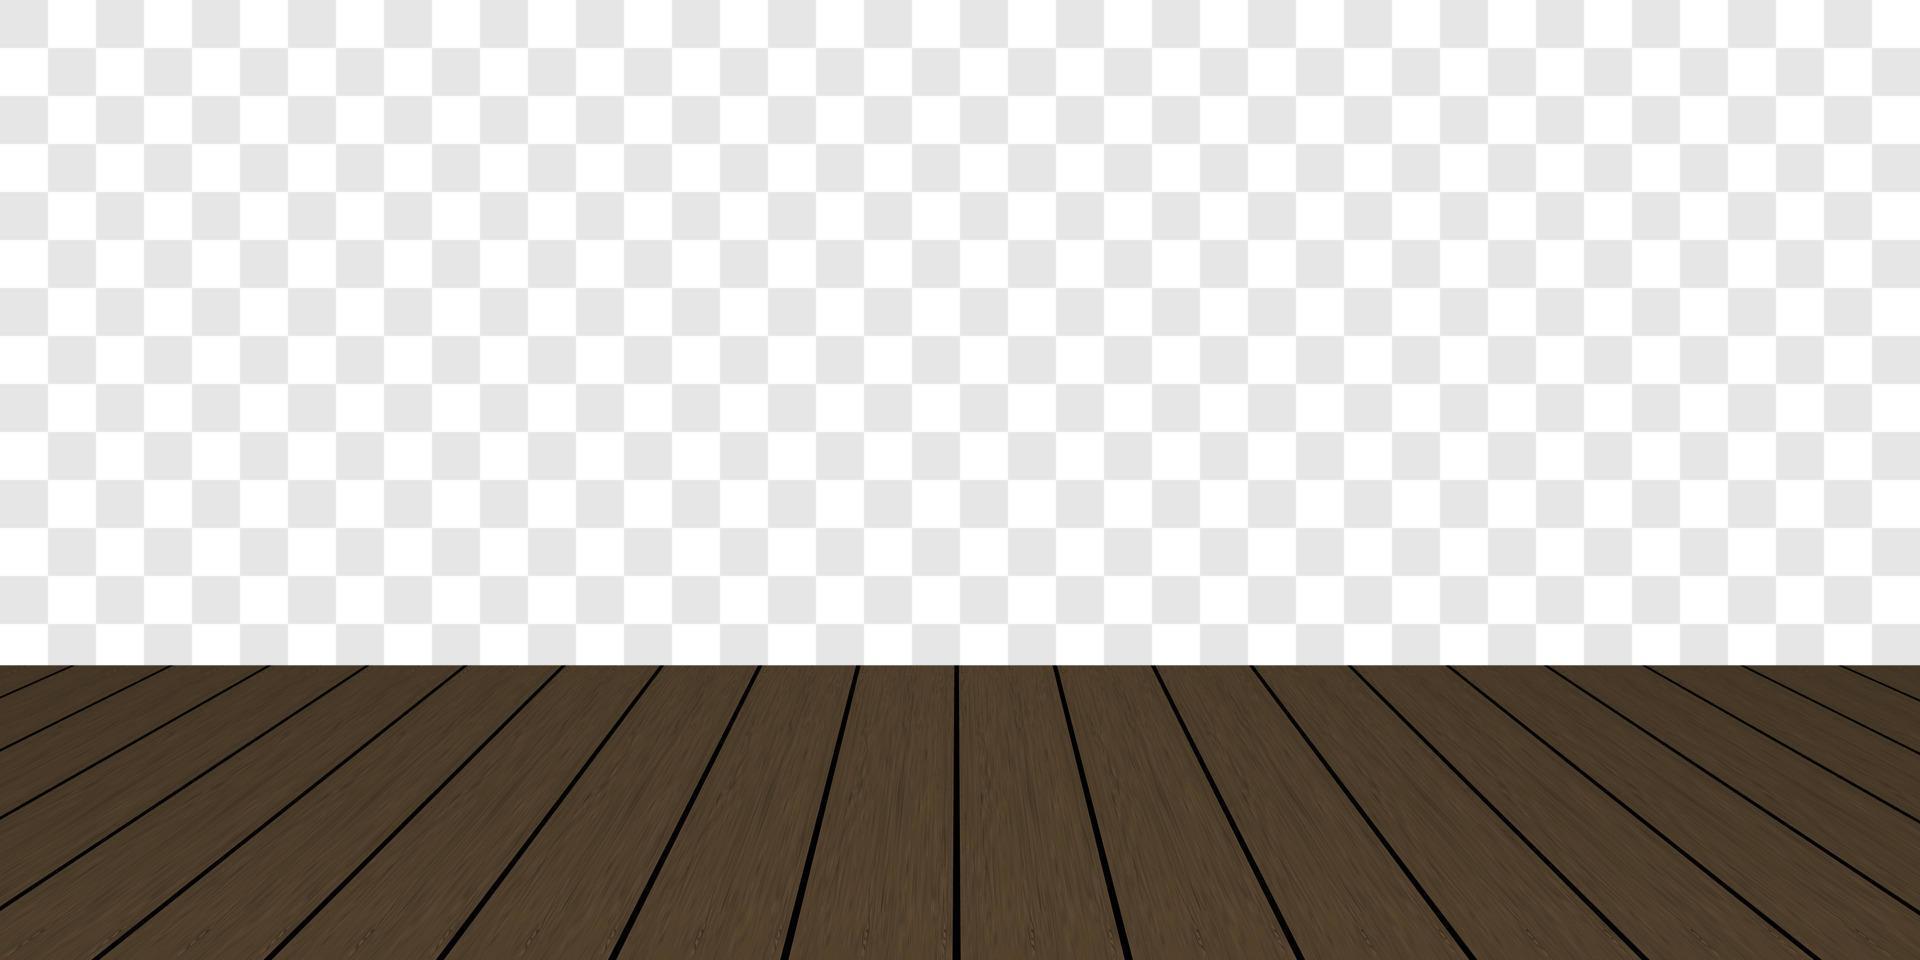 Realistic dark brown wood floor and grey checkered background vector